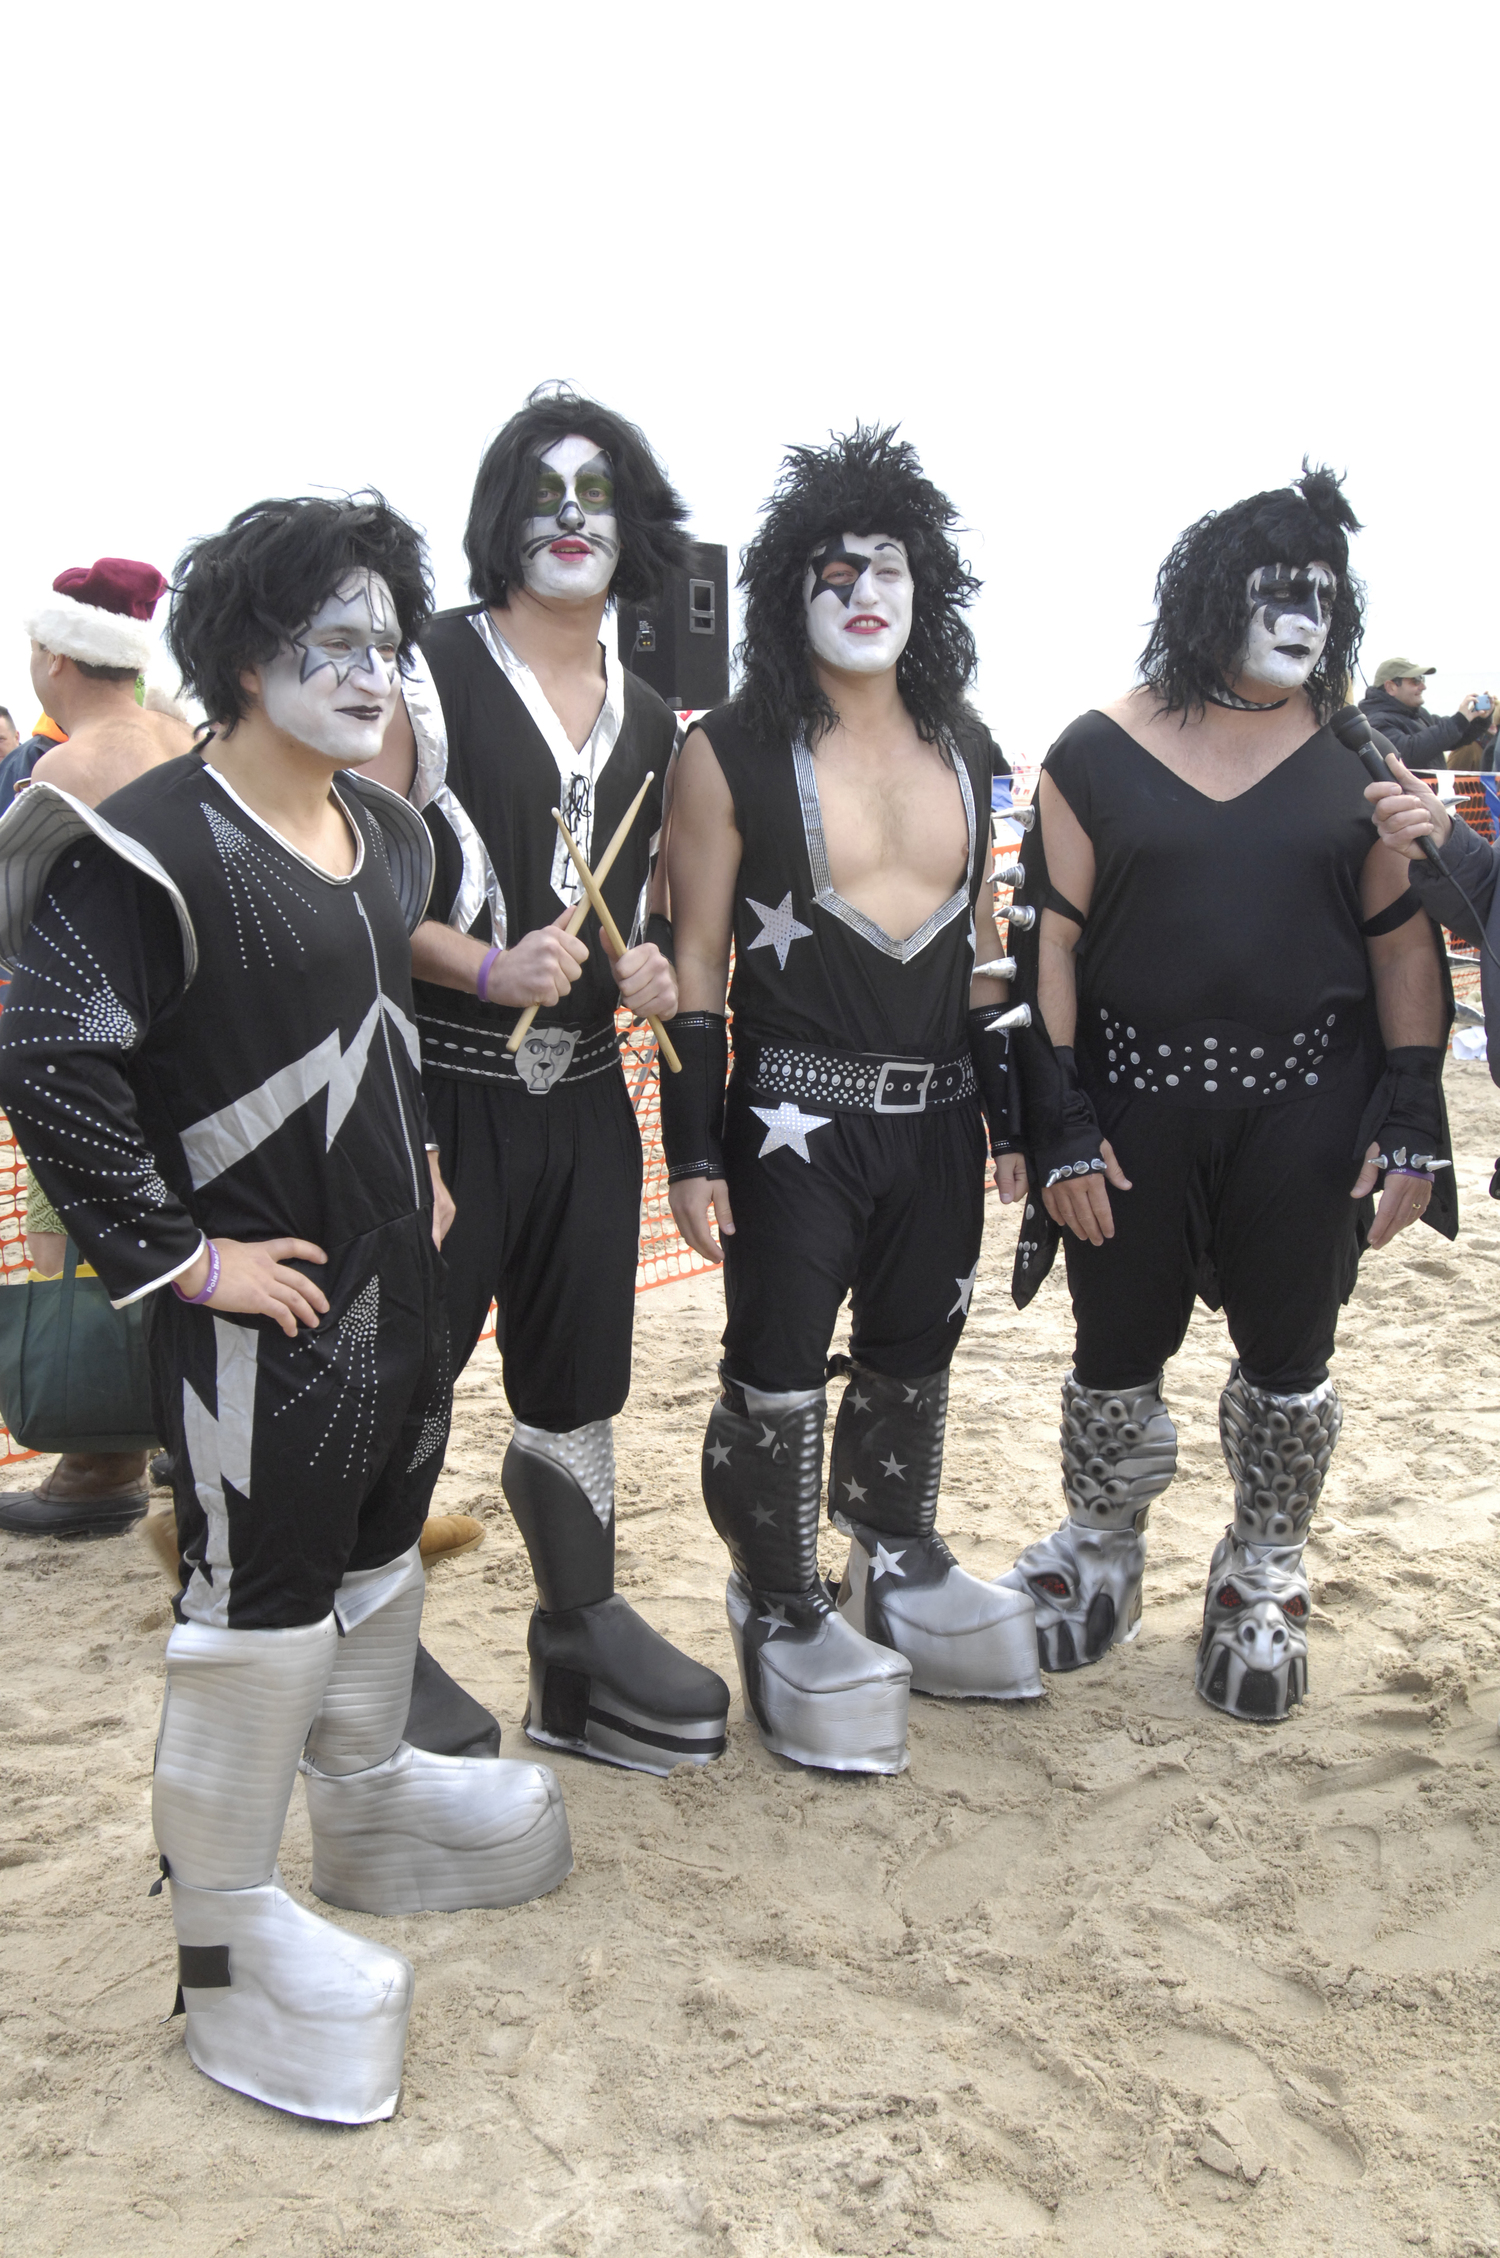 The Epley's as Kiss at the 2011 Polar Bear Plunge.